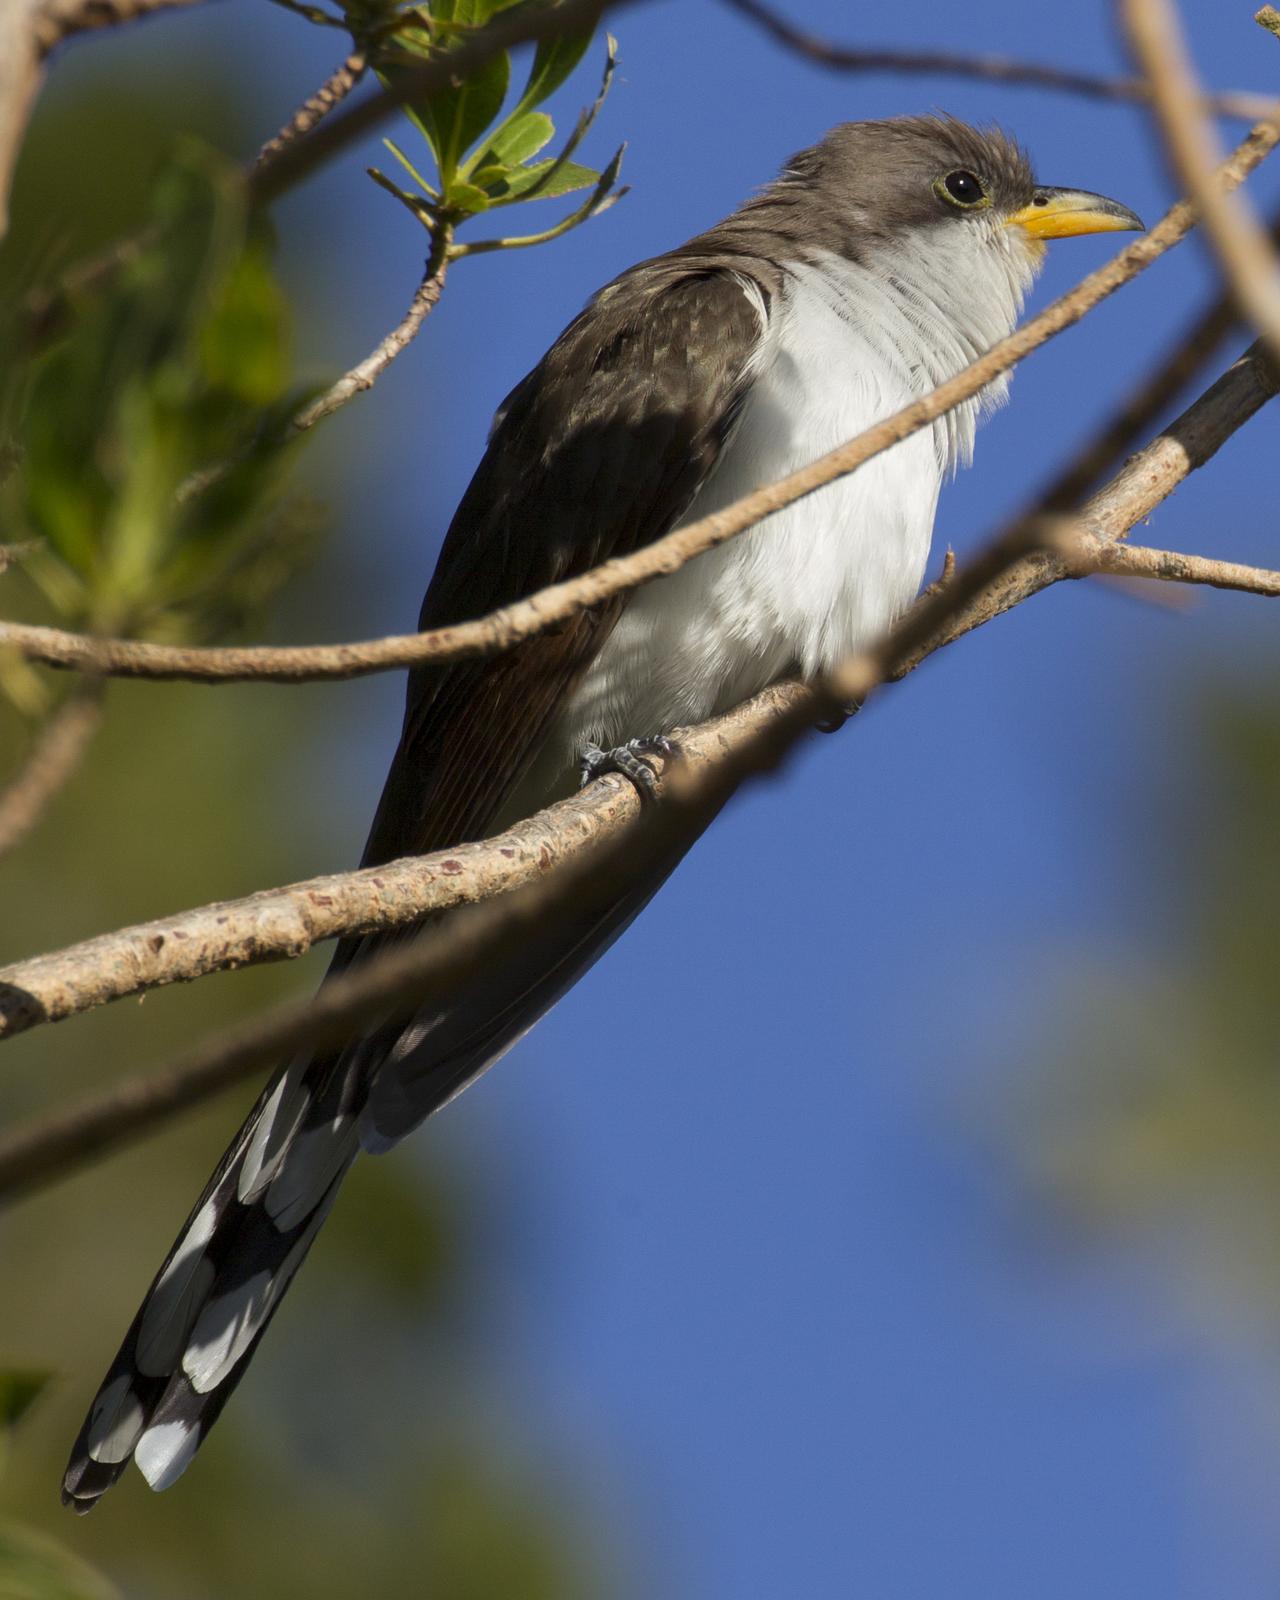 Yellow-billed Cuckoo Photo by Jeff Moore